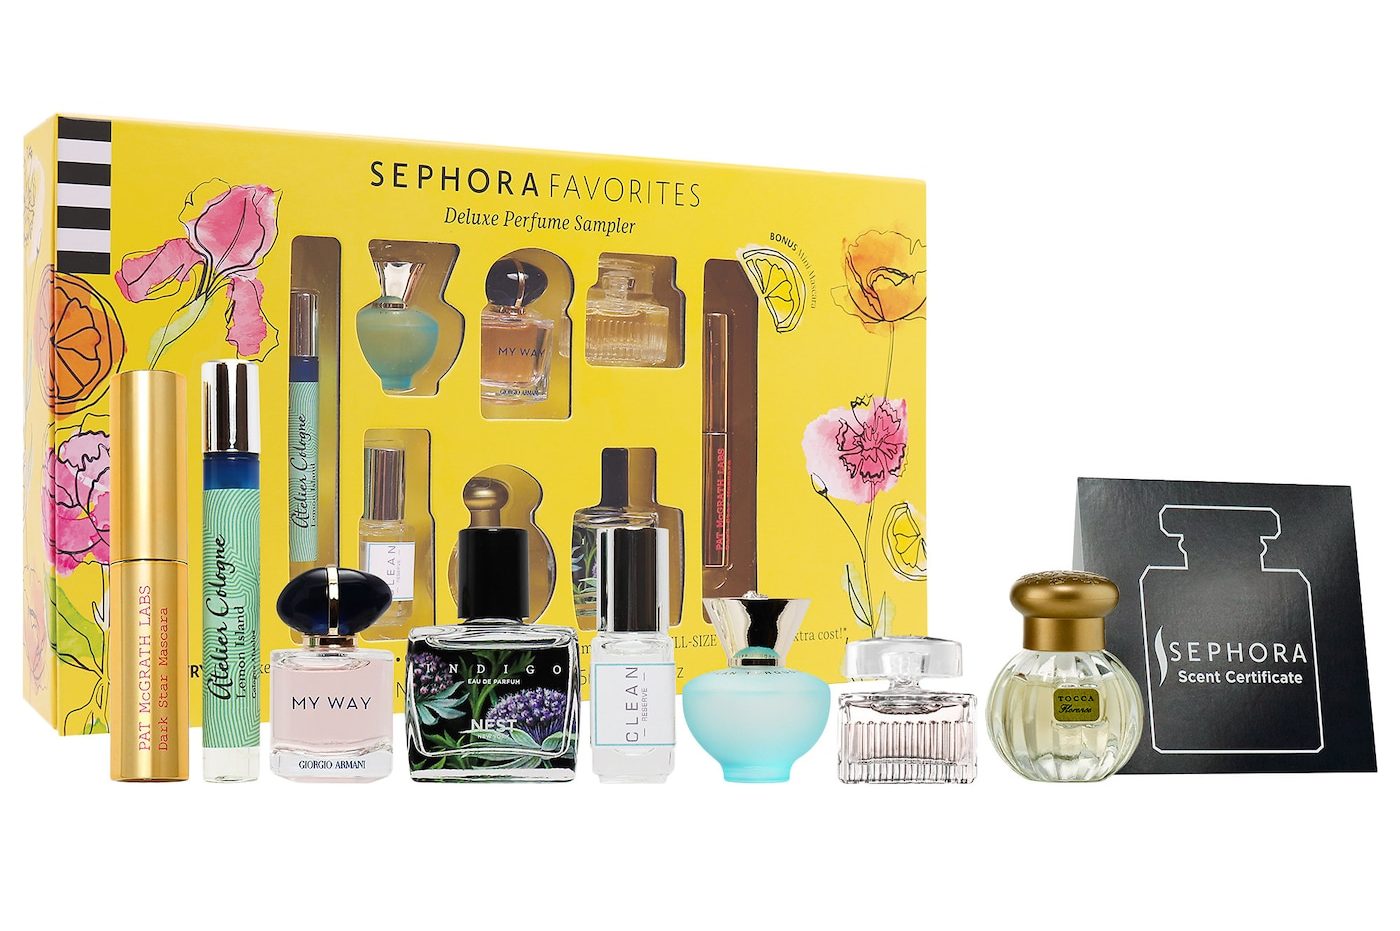 New Sephora Favorites Fragrance Sets Available Now + Full Spoilers MSA